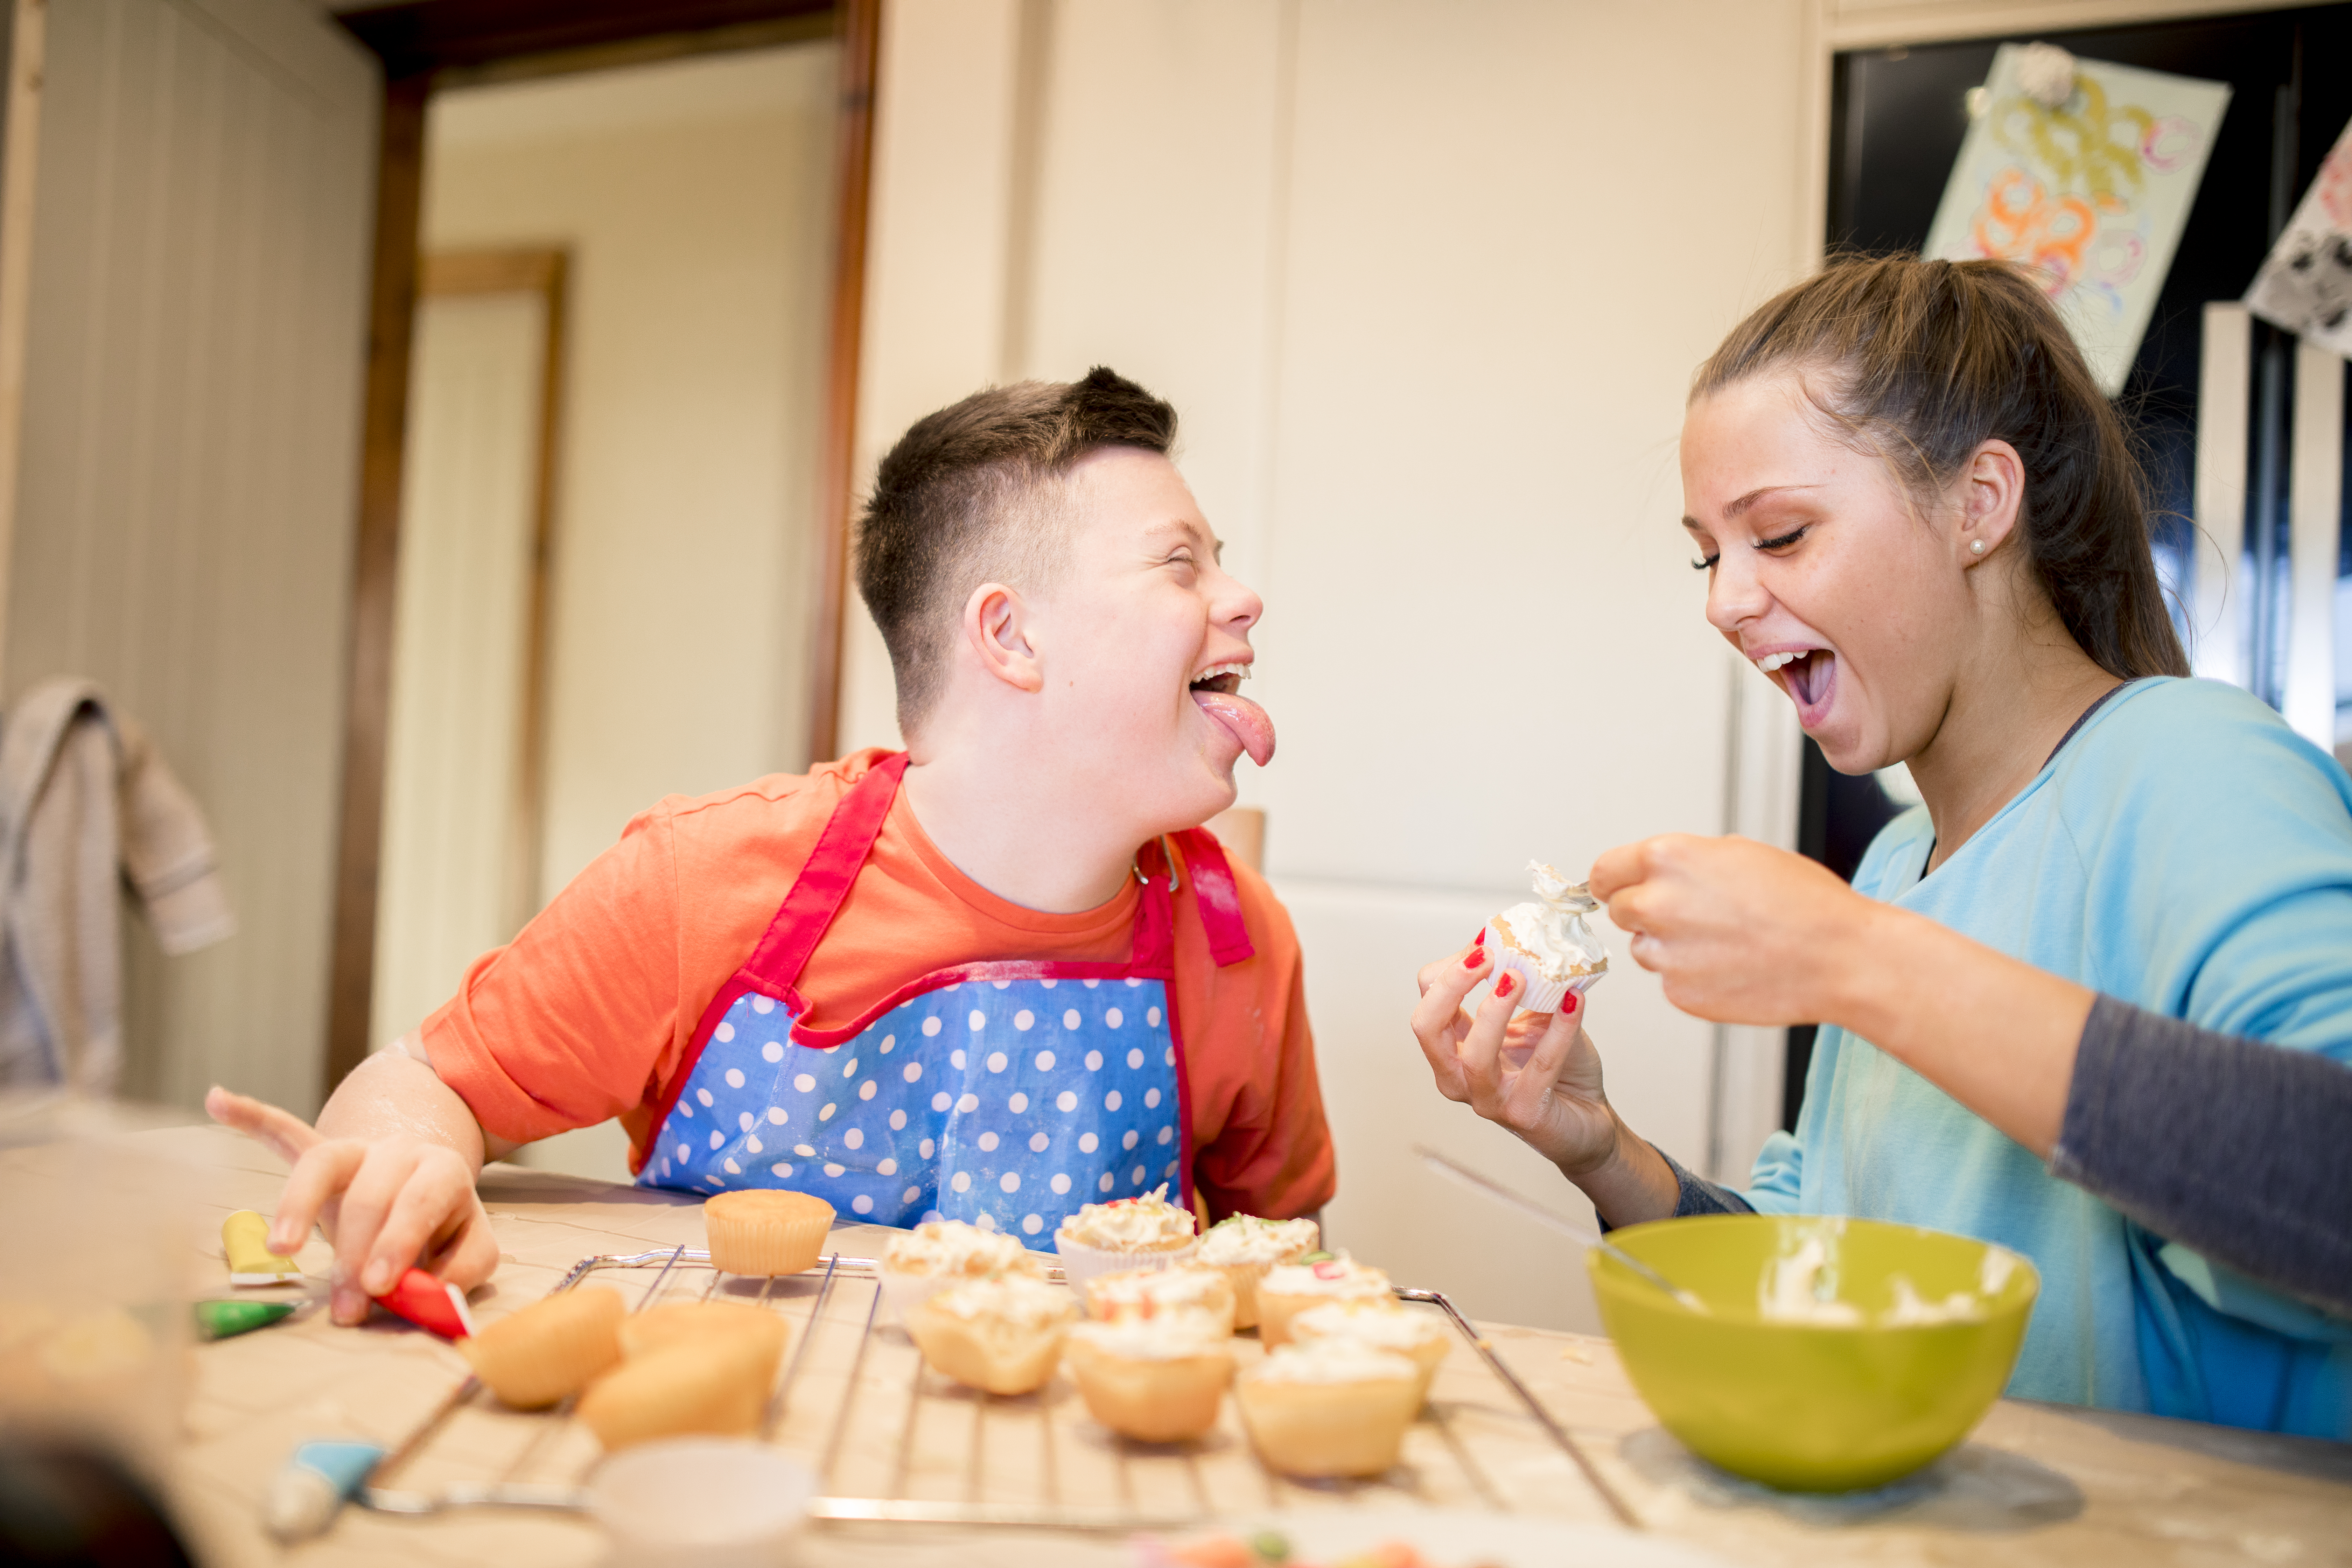 Boy with down syndrome bakes cakes with his sister